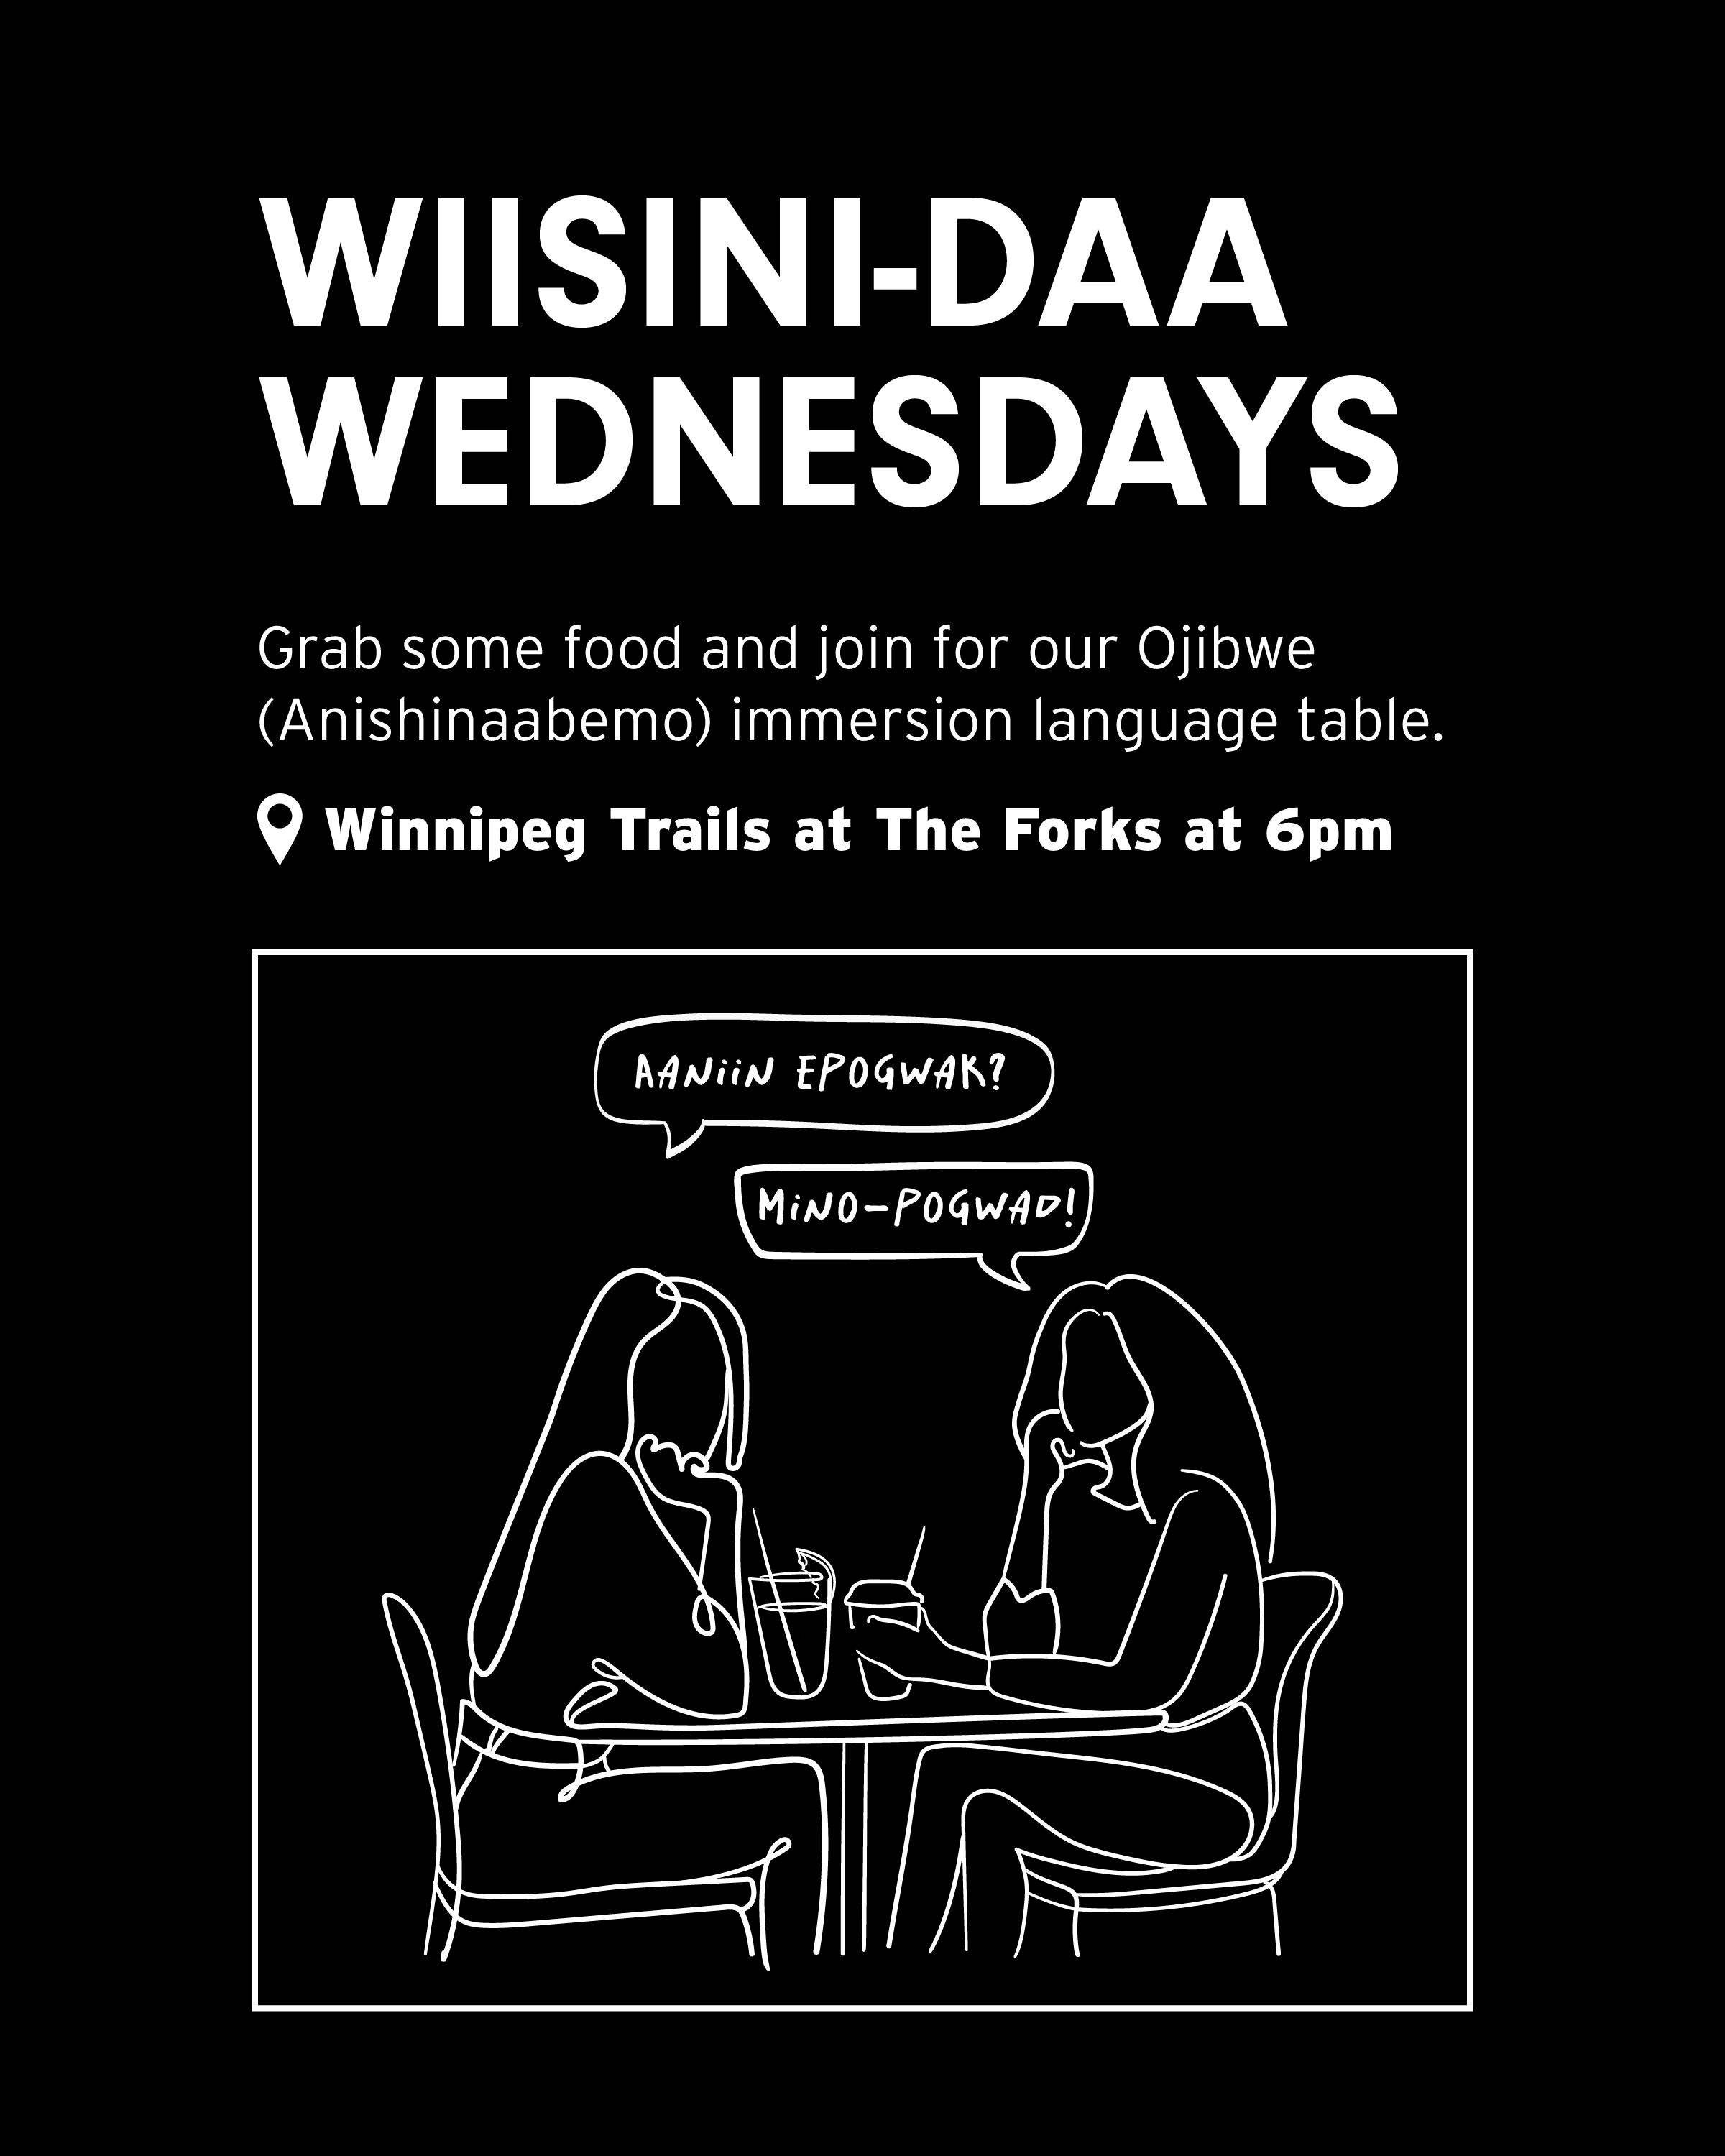 Poster for Wiisinidaa Wednesday, for an Ojibwe immersion language table